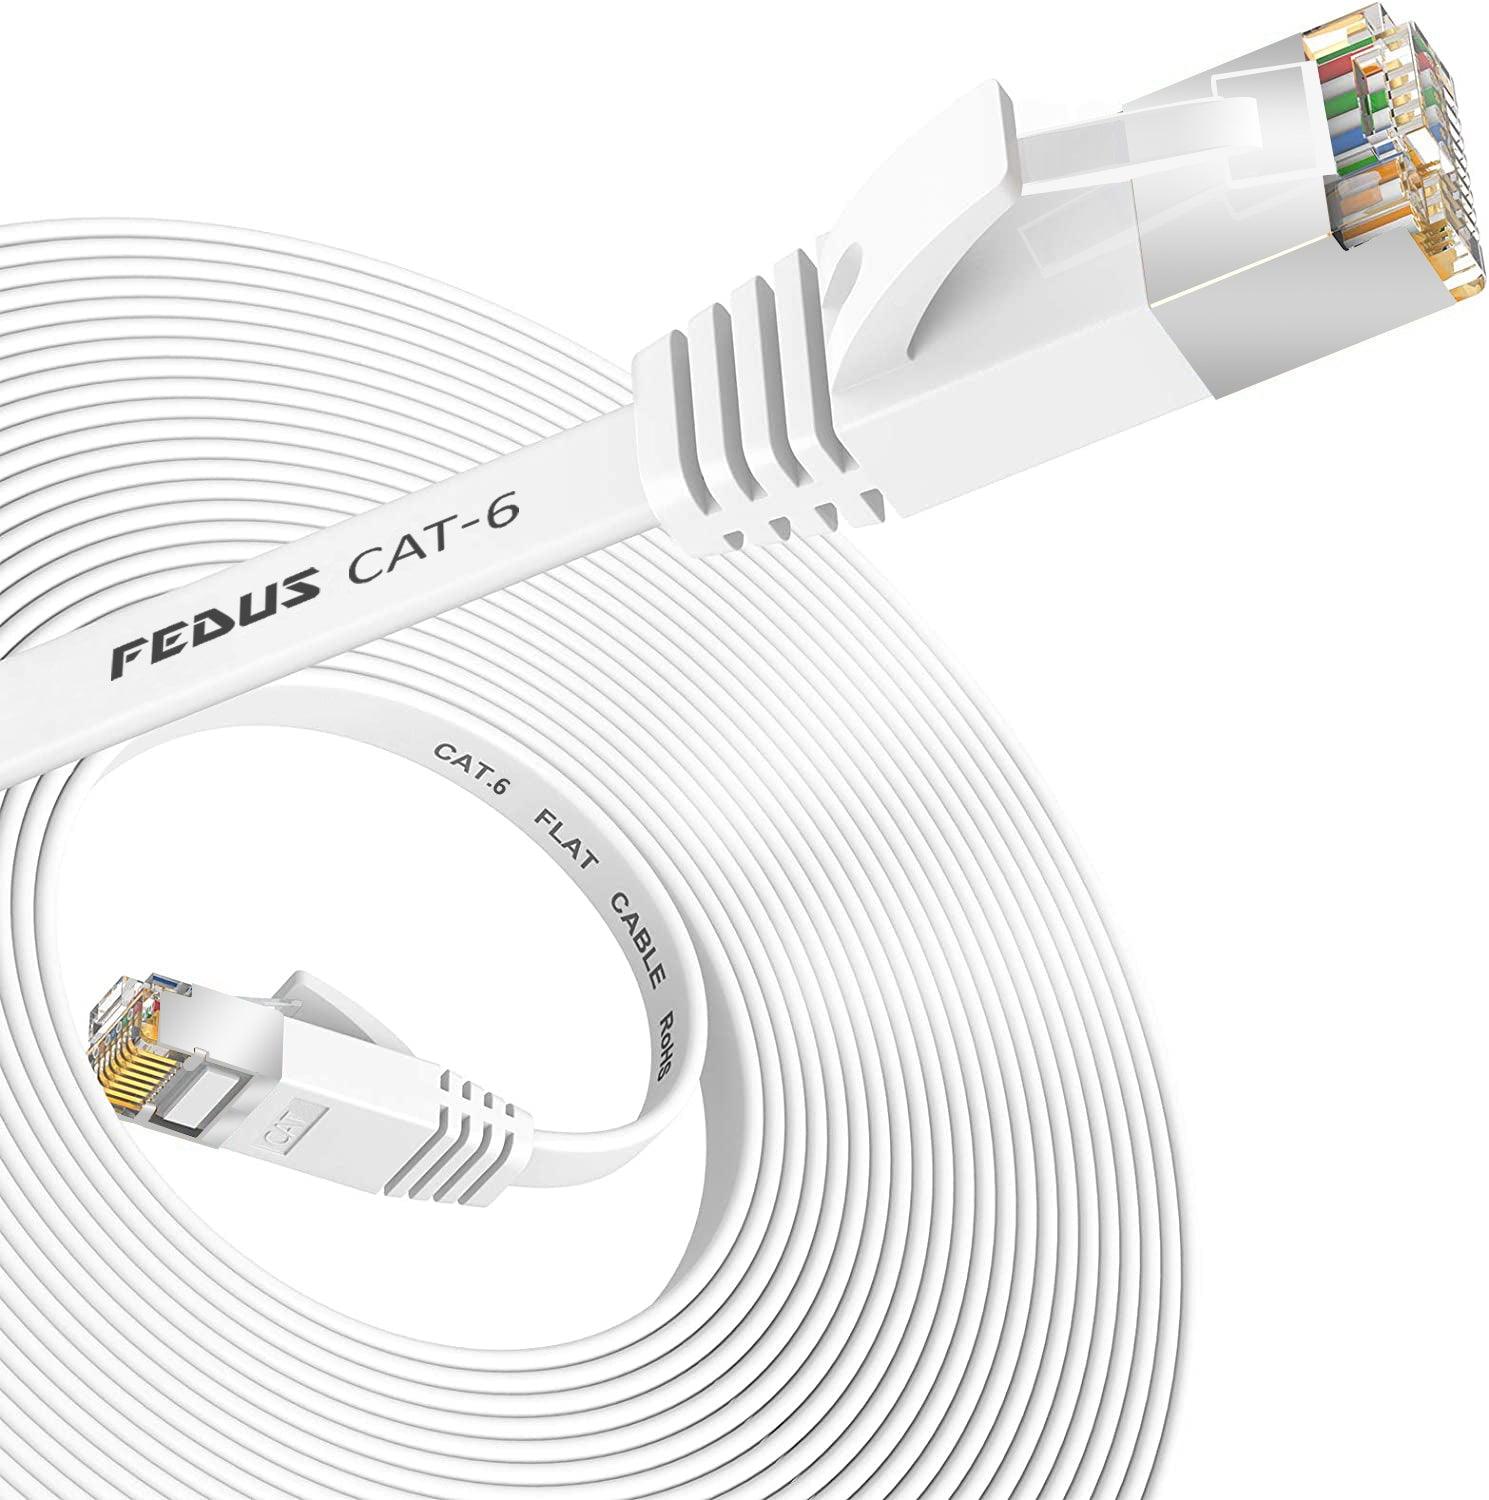 FEDUS Cat6 Ethernet Cable, Flat RJ45 LAN Cable wire High Speed 250MHZ / 1 Gigabit Speed UTP LAN Cable, Network Internet Cable, Patch Computer Cord Gigabit Category 6 Wires for Modem, Router - FEDUS